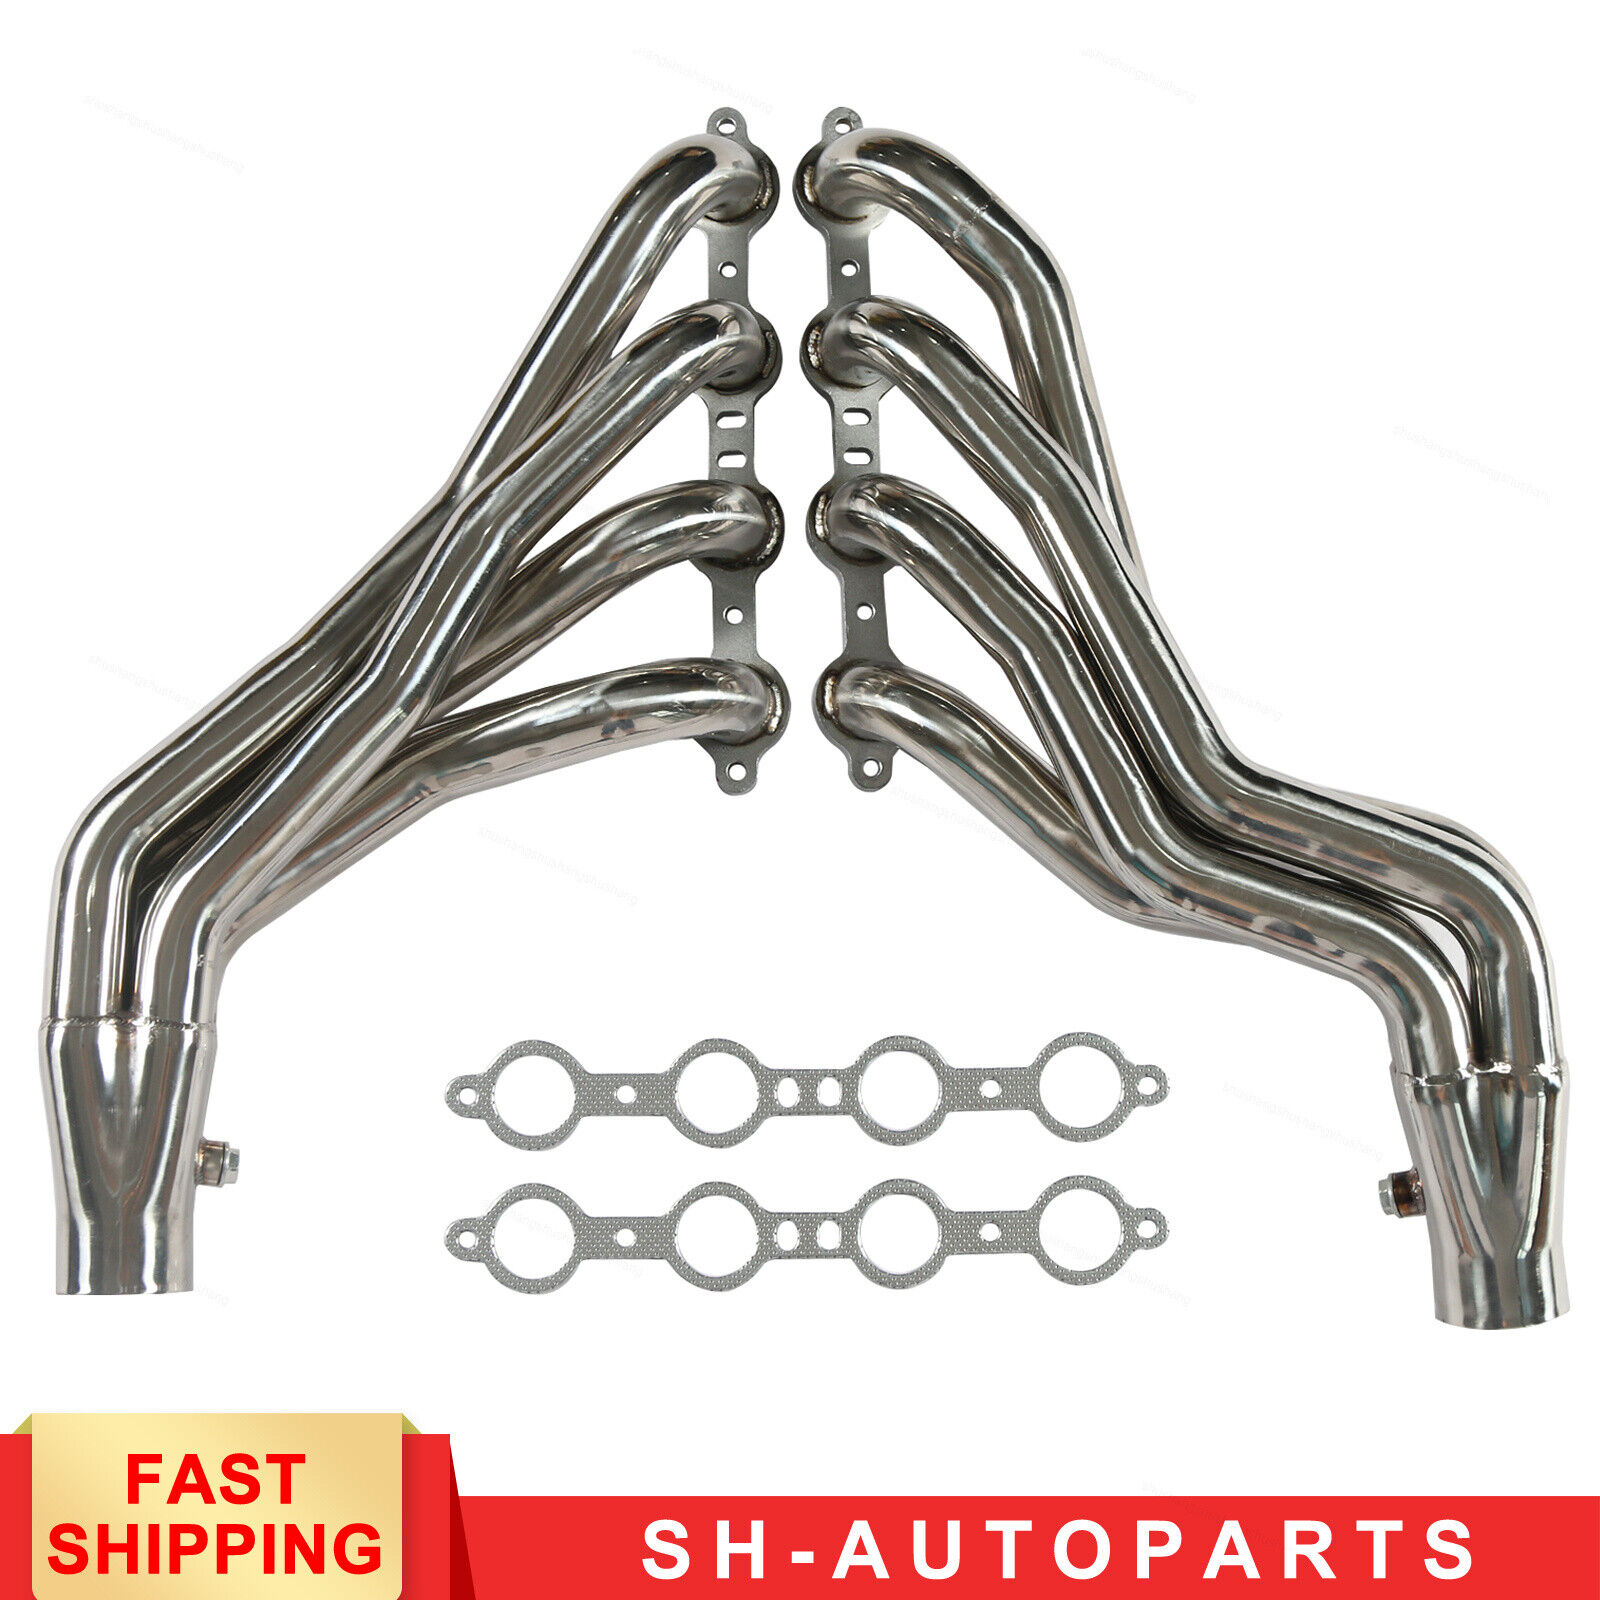 For Camaro Firebird 82-92 5.0L 5.7L  Manifold Long Tube Headers Stainless Steel